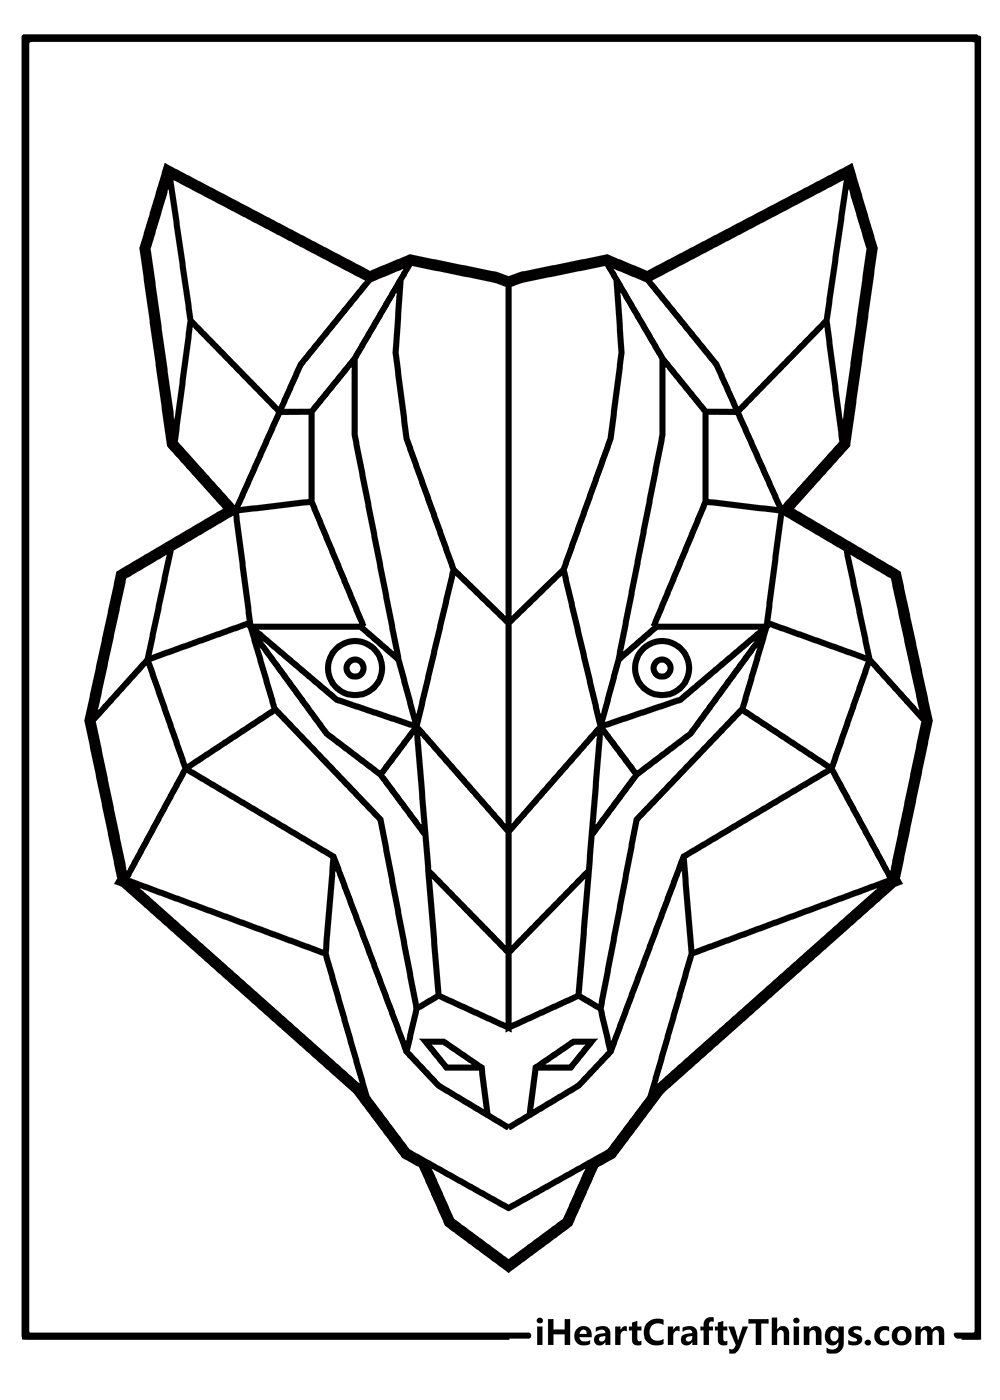 Animal Coloring Pages free download